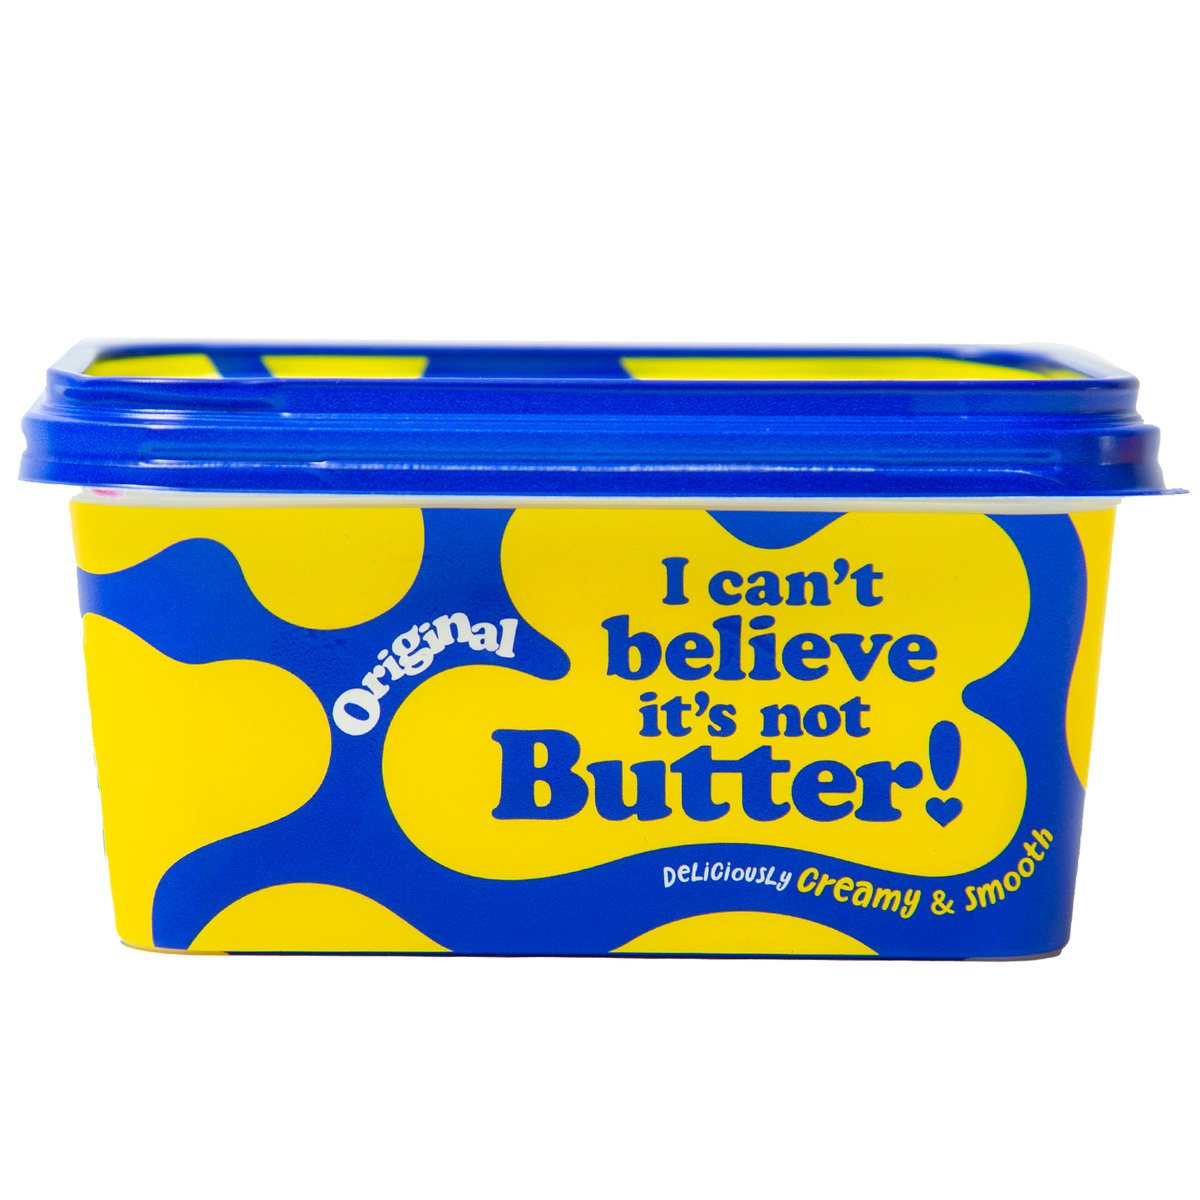 I Cant Believe I Can't Believe It's Not Butter Original 450 g